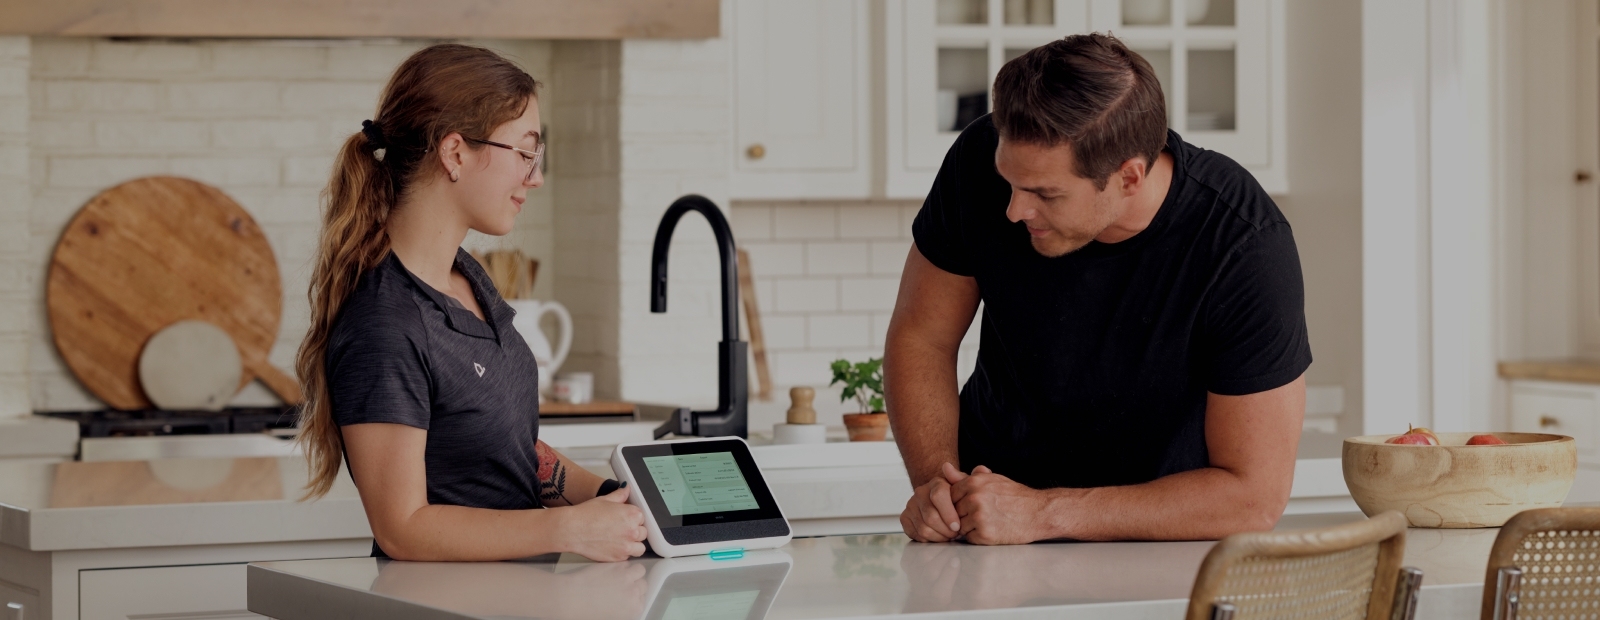 Hero image depicting a Vivint technician discussing with a potential client